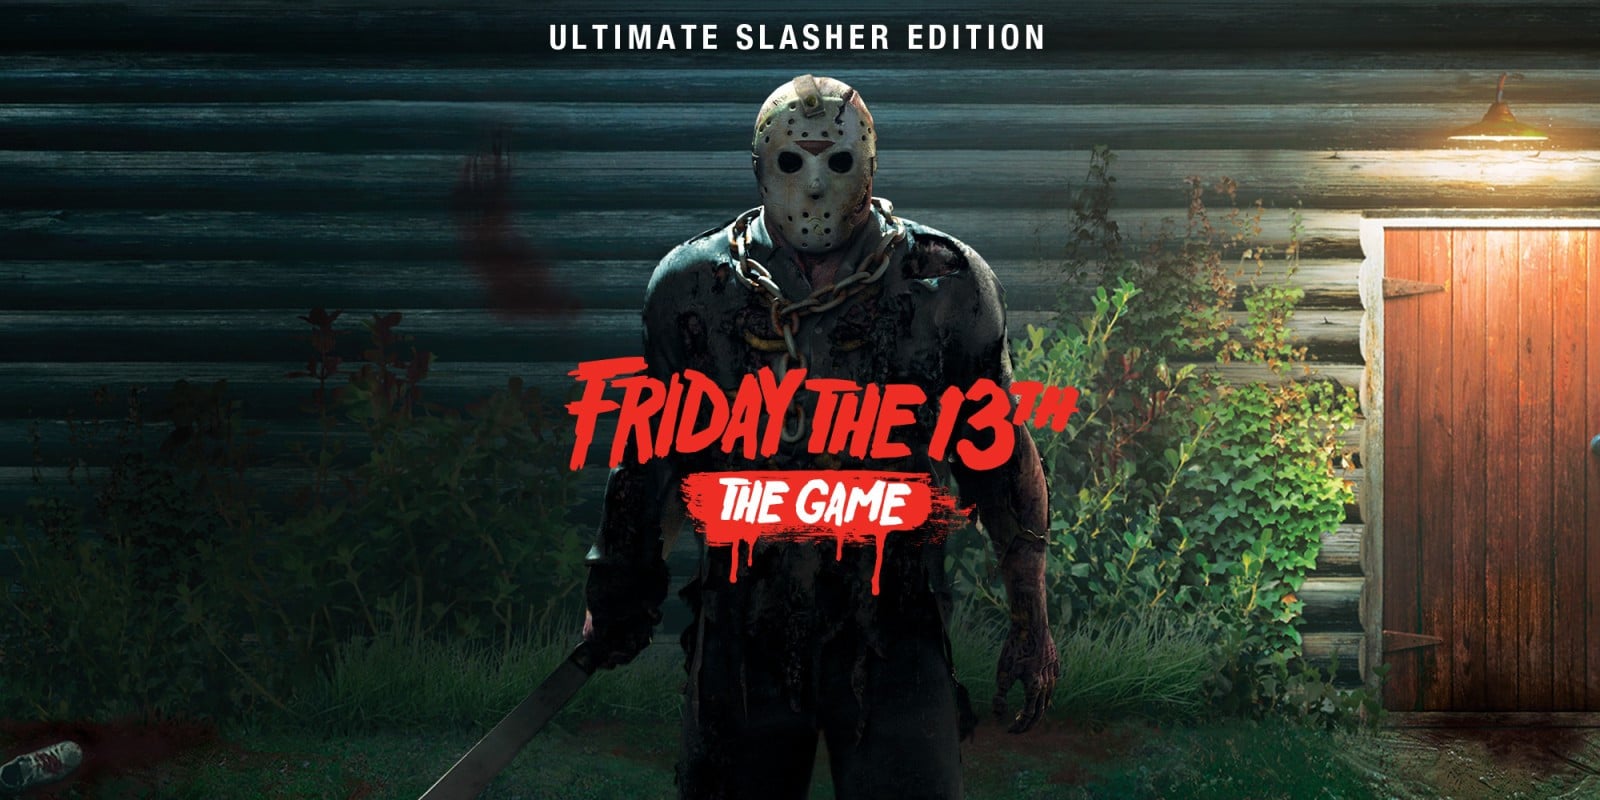 Friday the 13th Ultimate Slasher Edition ,Nintendo Switch Review, GamersRD